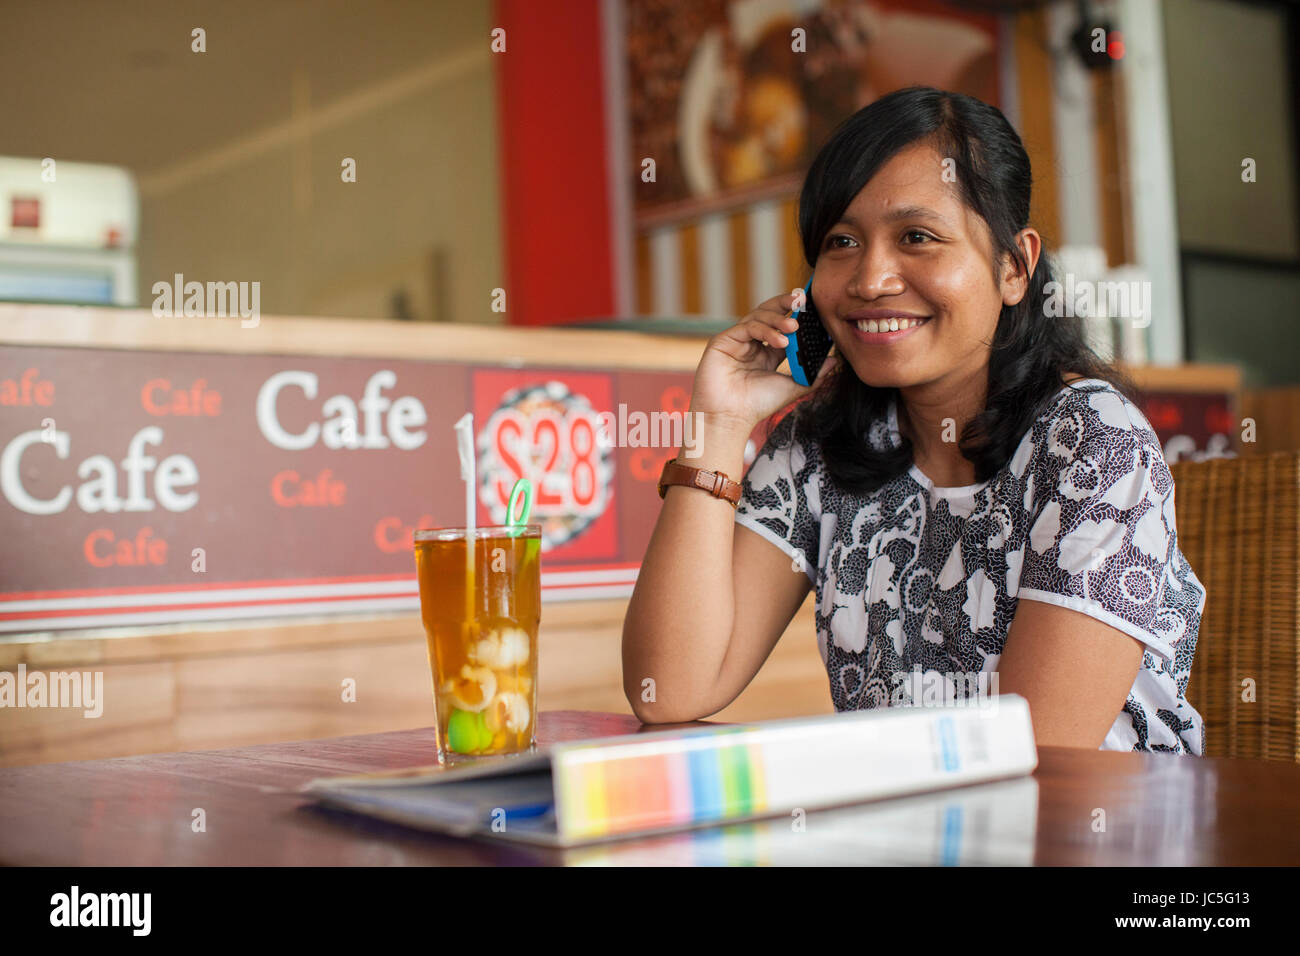 A woman having a drink outside a cafe, talking on her mobile, Indonesia, Asia. Stock Photo